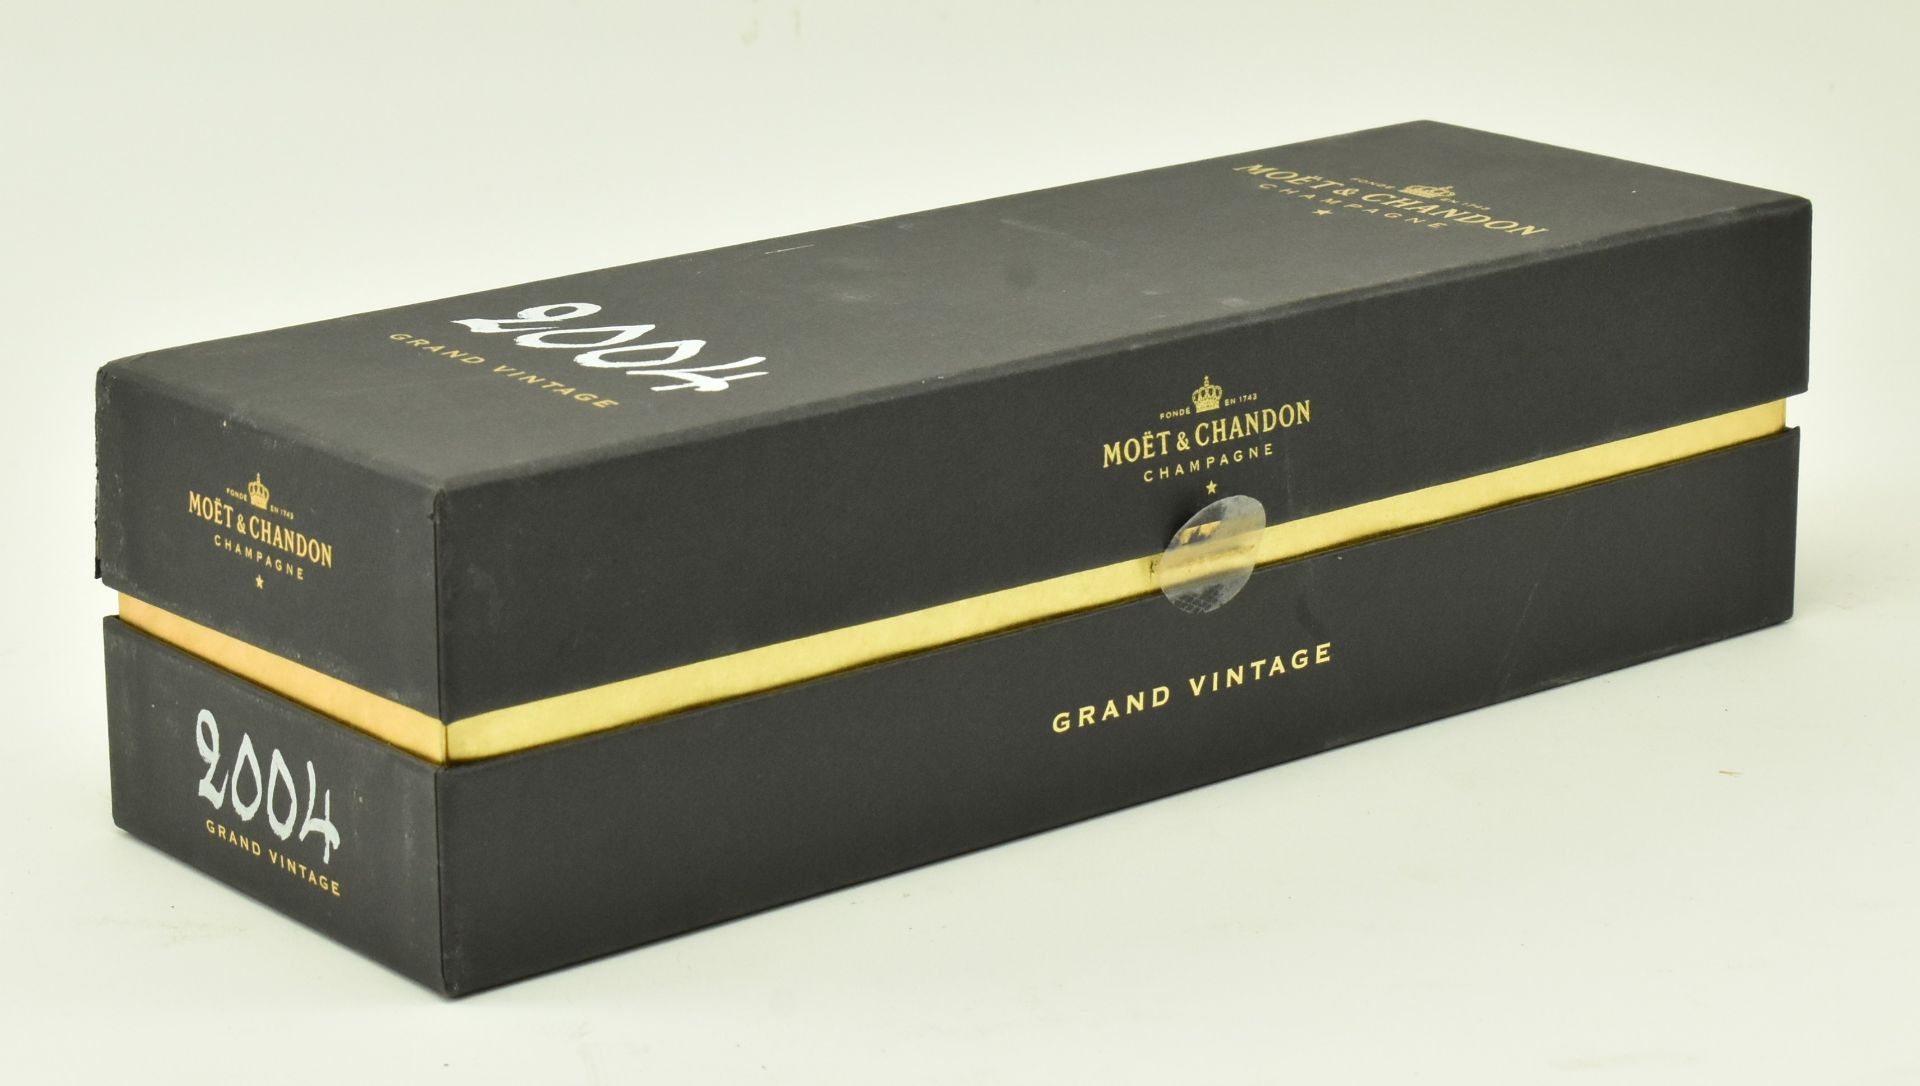 MOET & CHANDON CHAMPAGNE 2004 GRAND VINTAGE, BOXED - Image 9 of 9